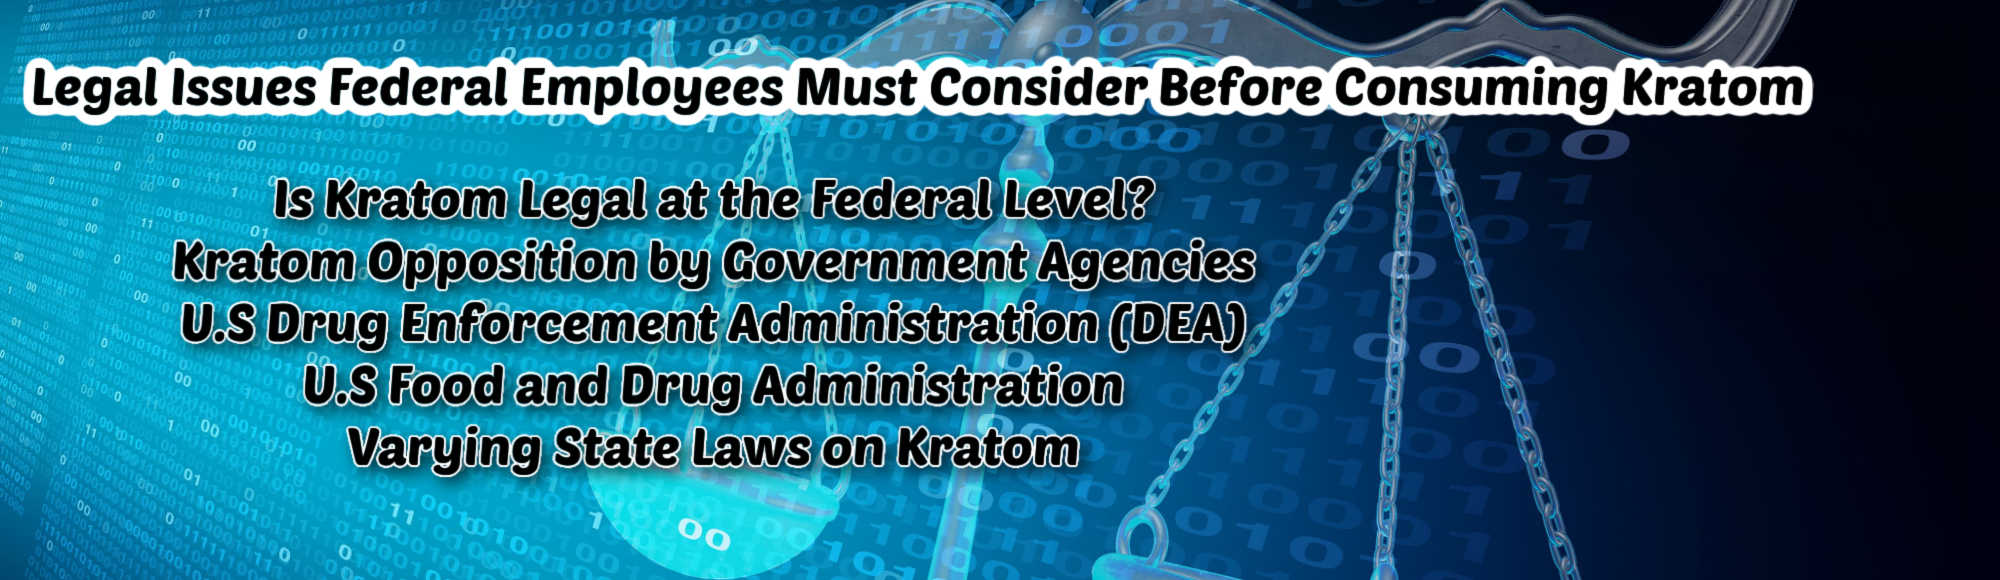 image of legal issues employees must consider before taking kratom